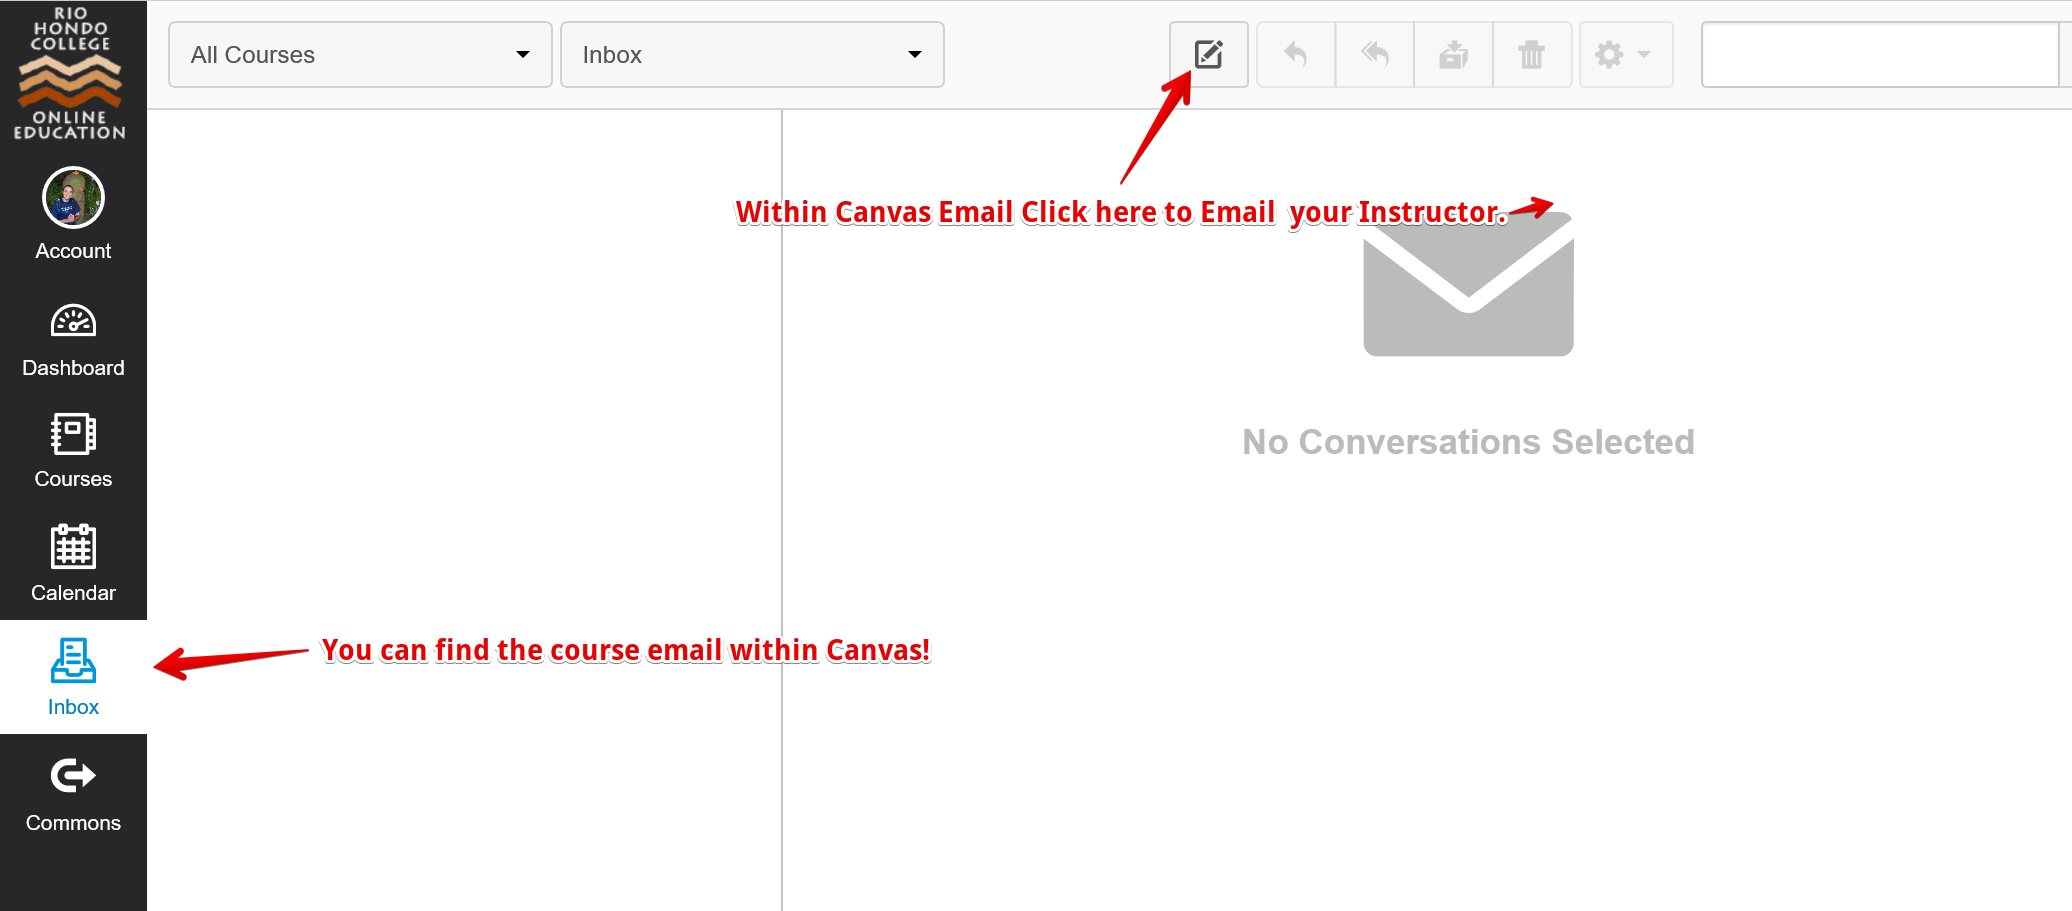 Email within Canvas for a quicker reply